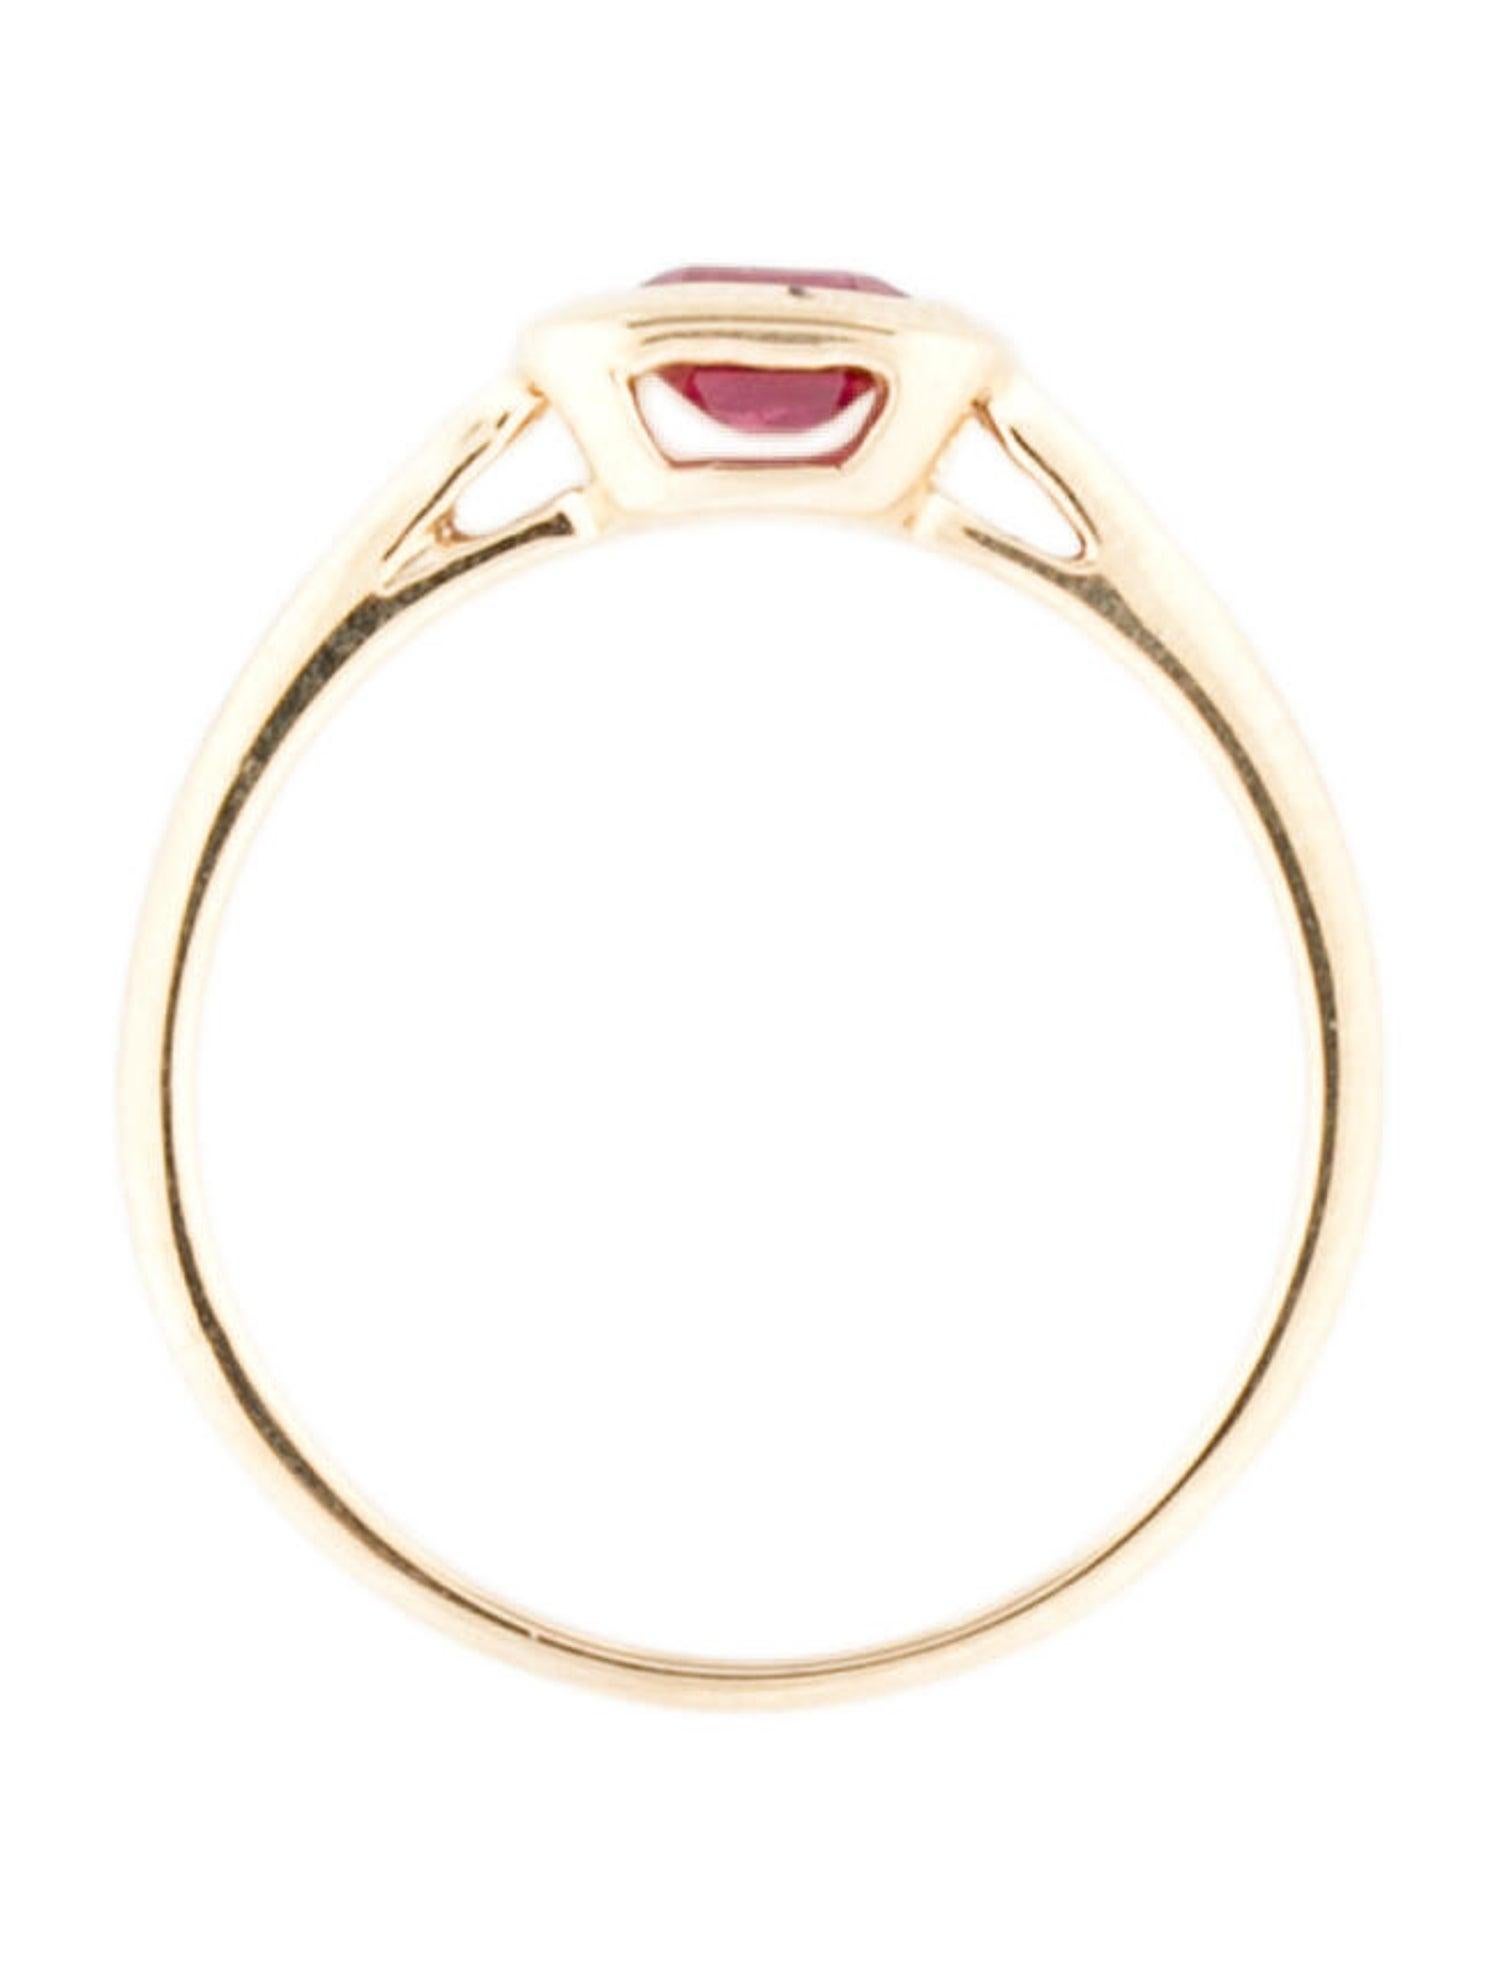 Contemporary 14k Yellow Gold & Emerald-Cut Red Ruby Emerald Ring 0.65 CTTW For Sale